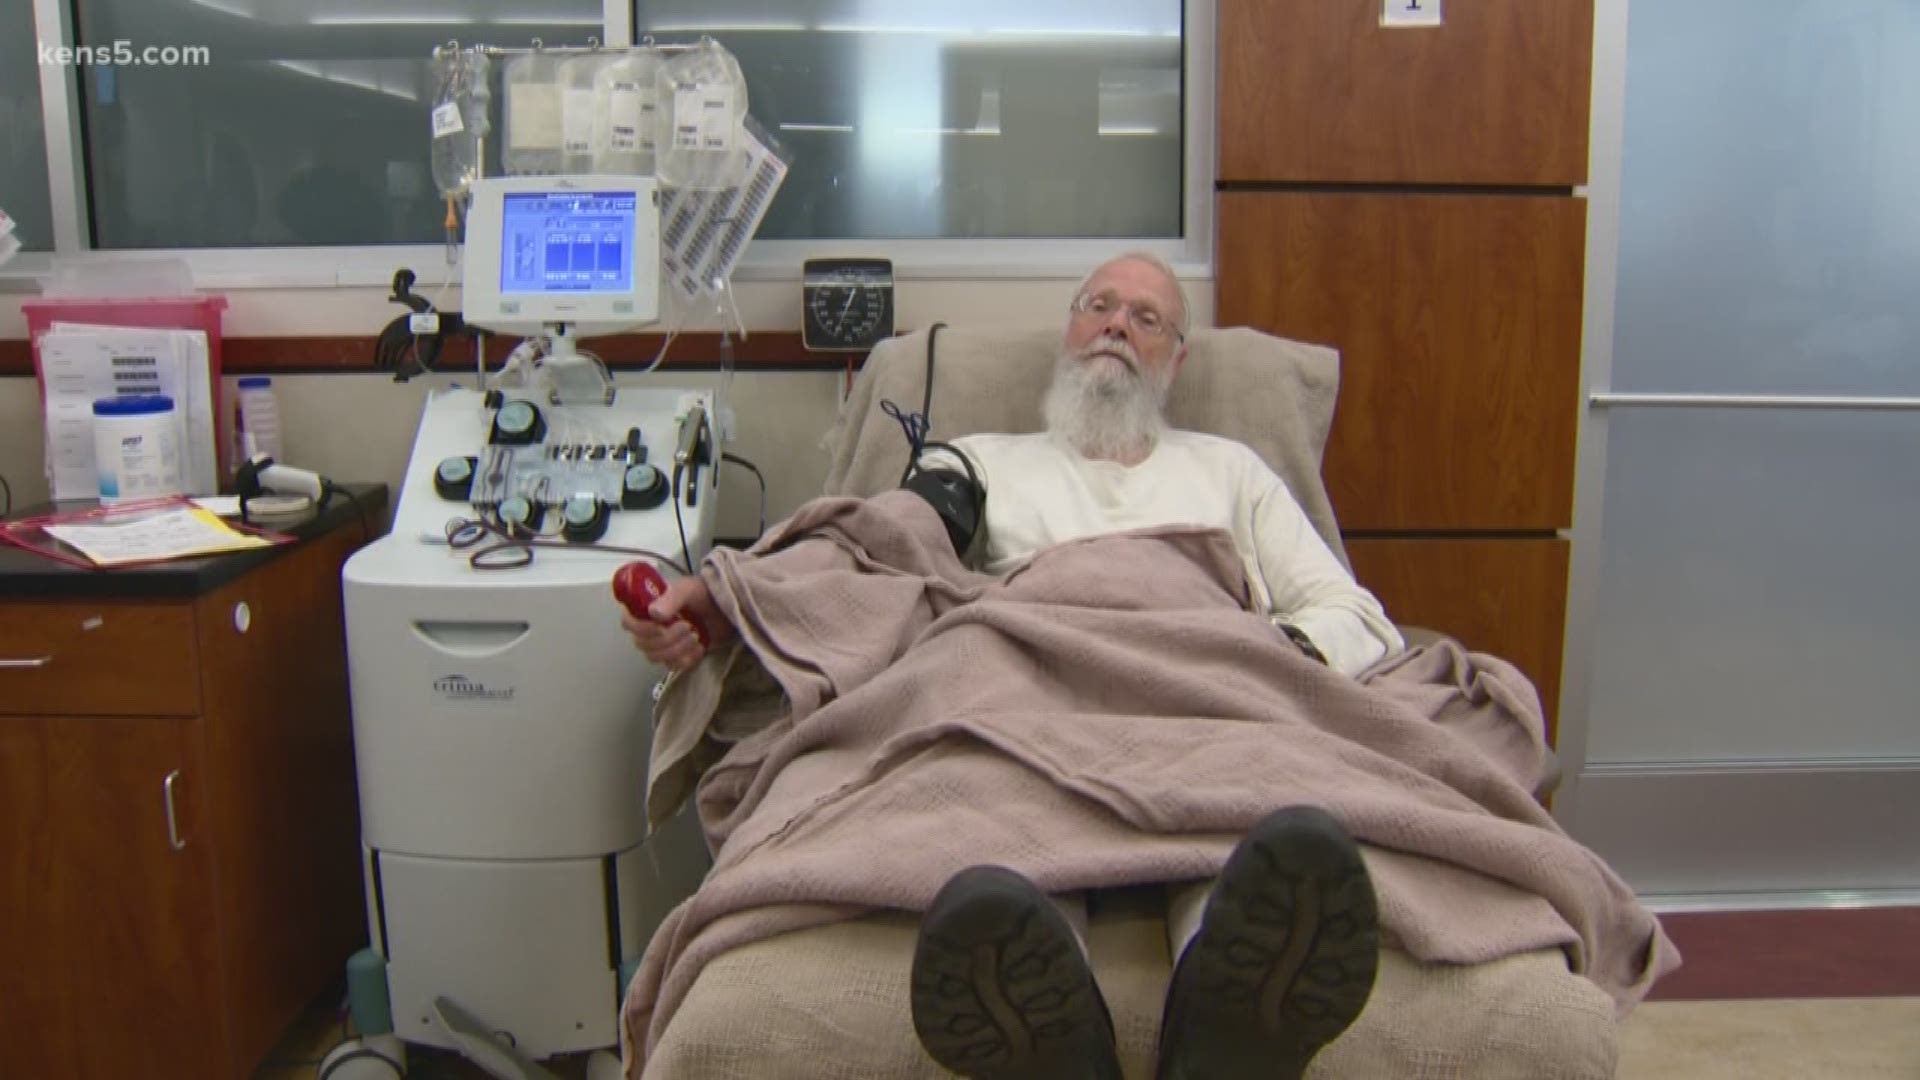 We caught up with Dennis Jones today as he gave blood at the Southwest Blood and Tissue center. Jones says he's given 100 gallons of blood over the last 25 years, saving countless lives. His father is his motivation.